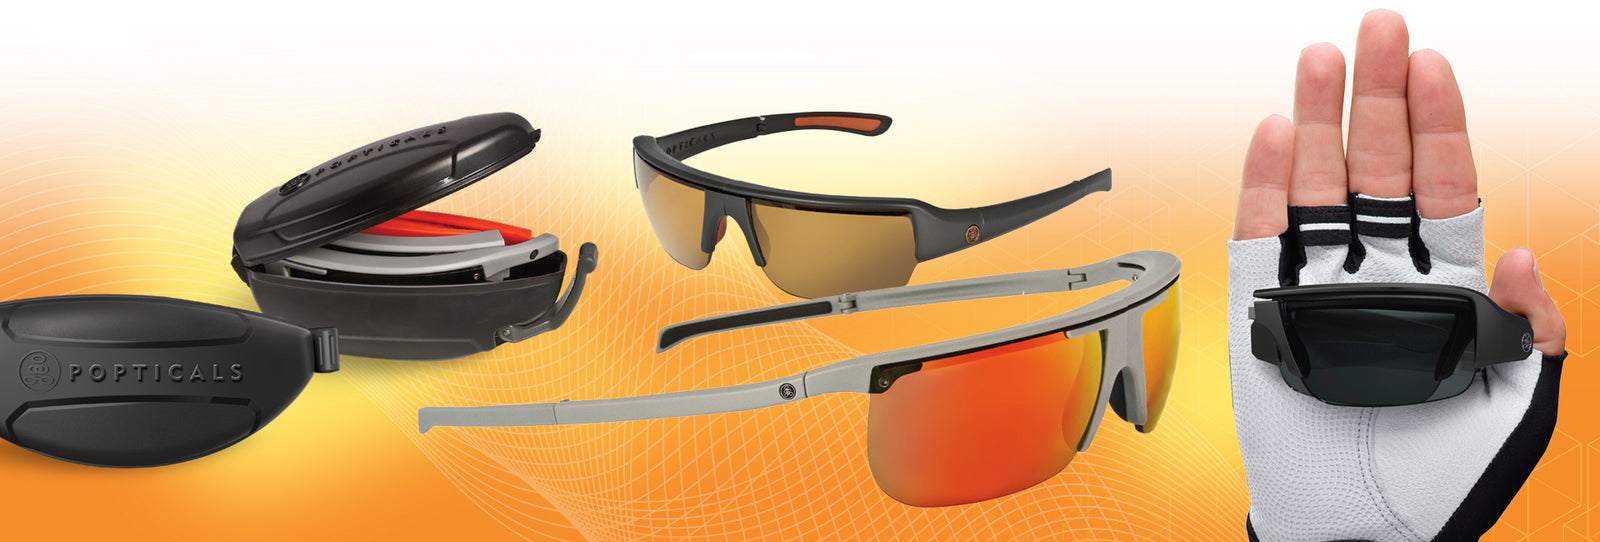 Popticals Features, NYDEF lenses by Carl Zeiss Vision,  FL2 Micro-Rail System, True Portability